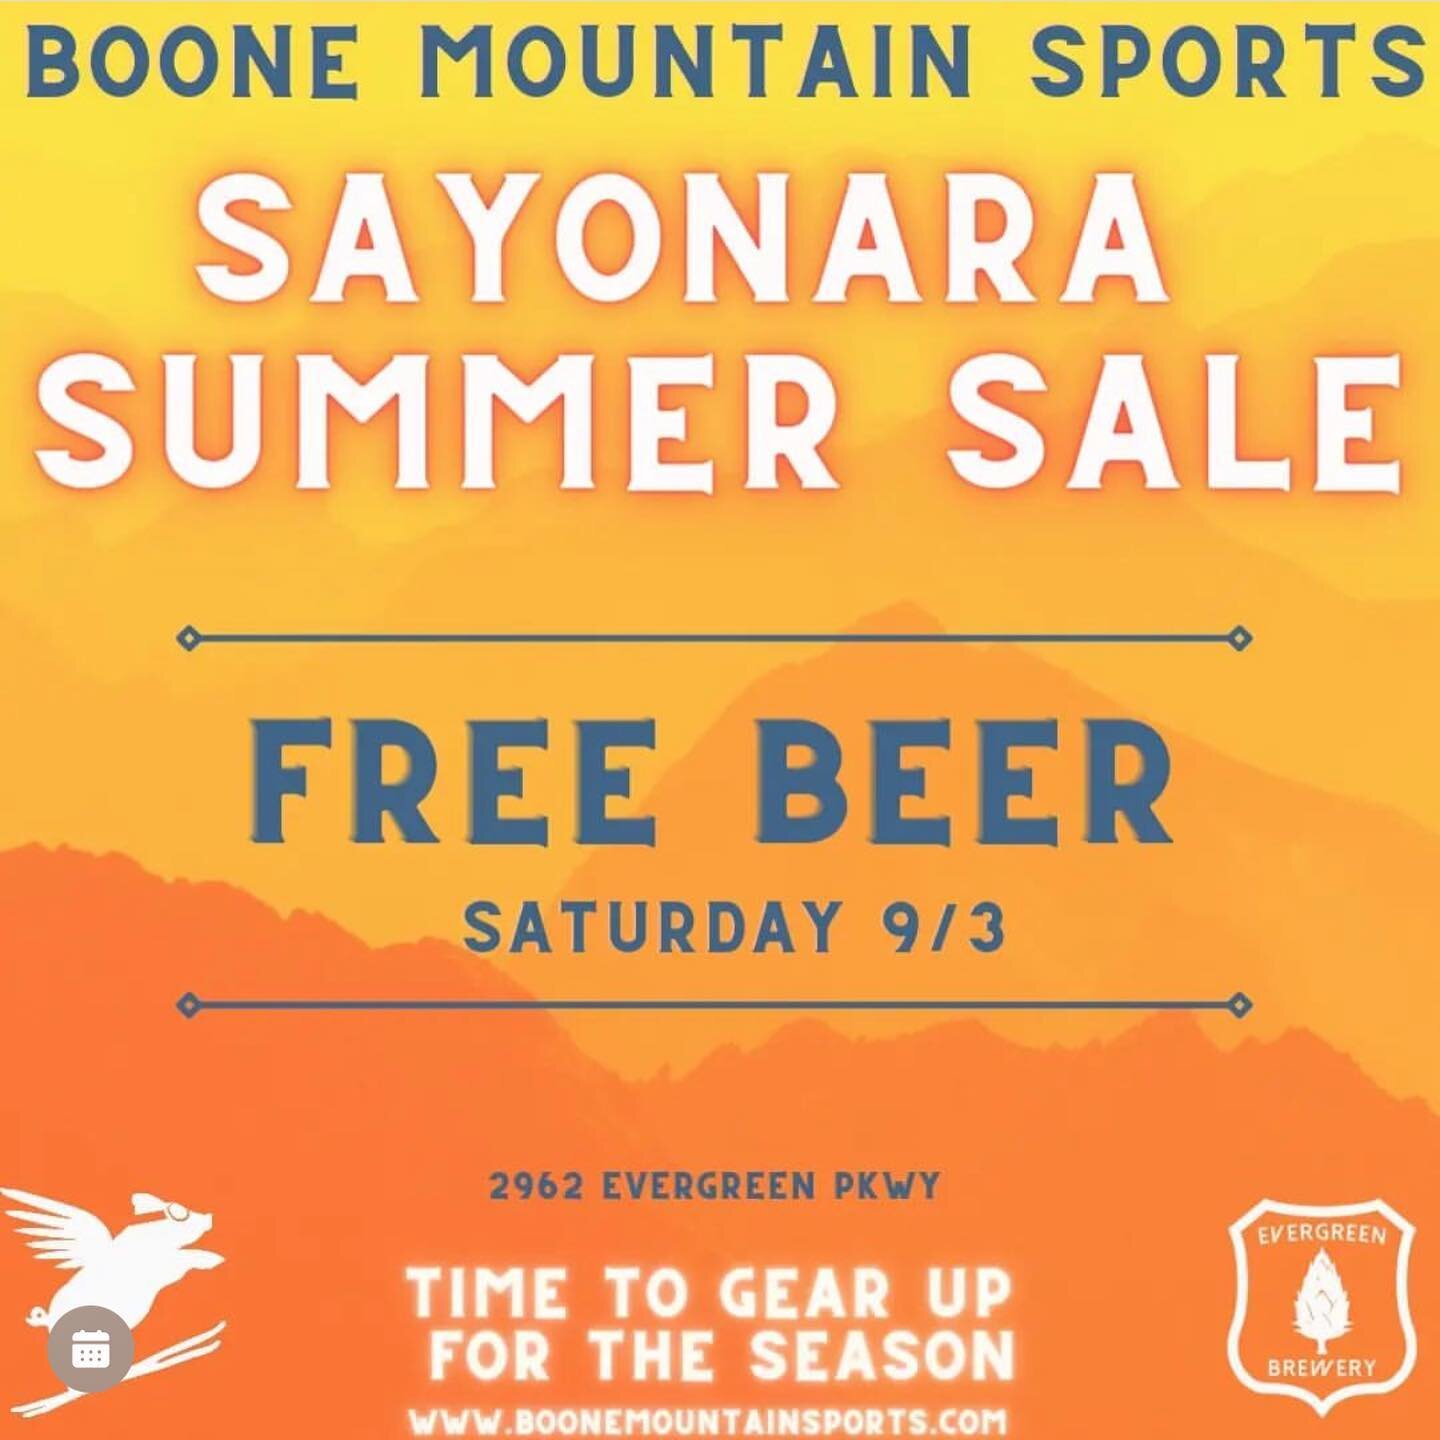 The day we&rsquo;ve all been waiting for&hellip; 
@boonemountainsports SUMMER SALE kicks off at 10am. 
🎿 Up to 60% off summer and winter gear
🍺 Free Beer upstairs @evergreenbrewery 
😂 Laughs guaranteed all day 

Checkout our stories for Sale Links